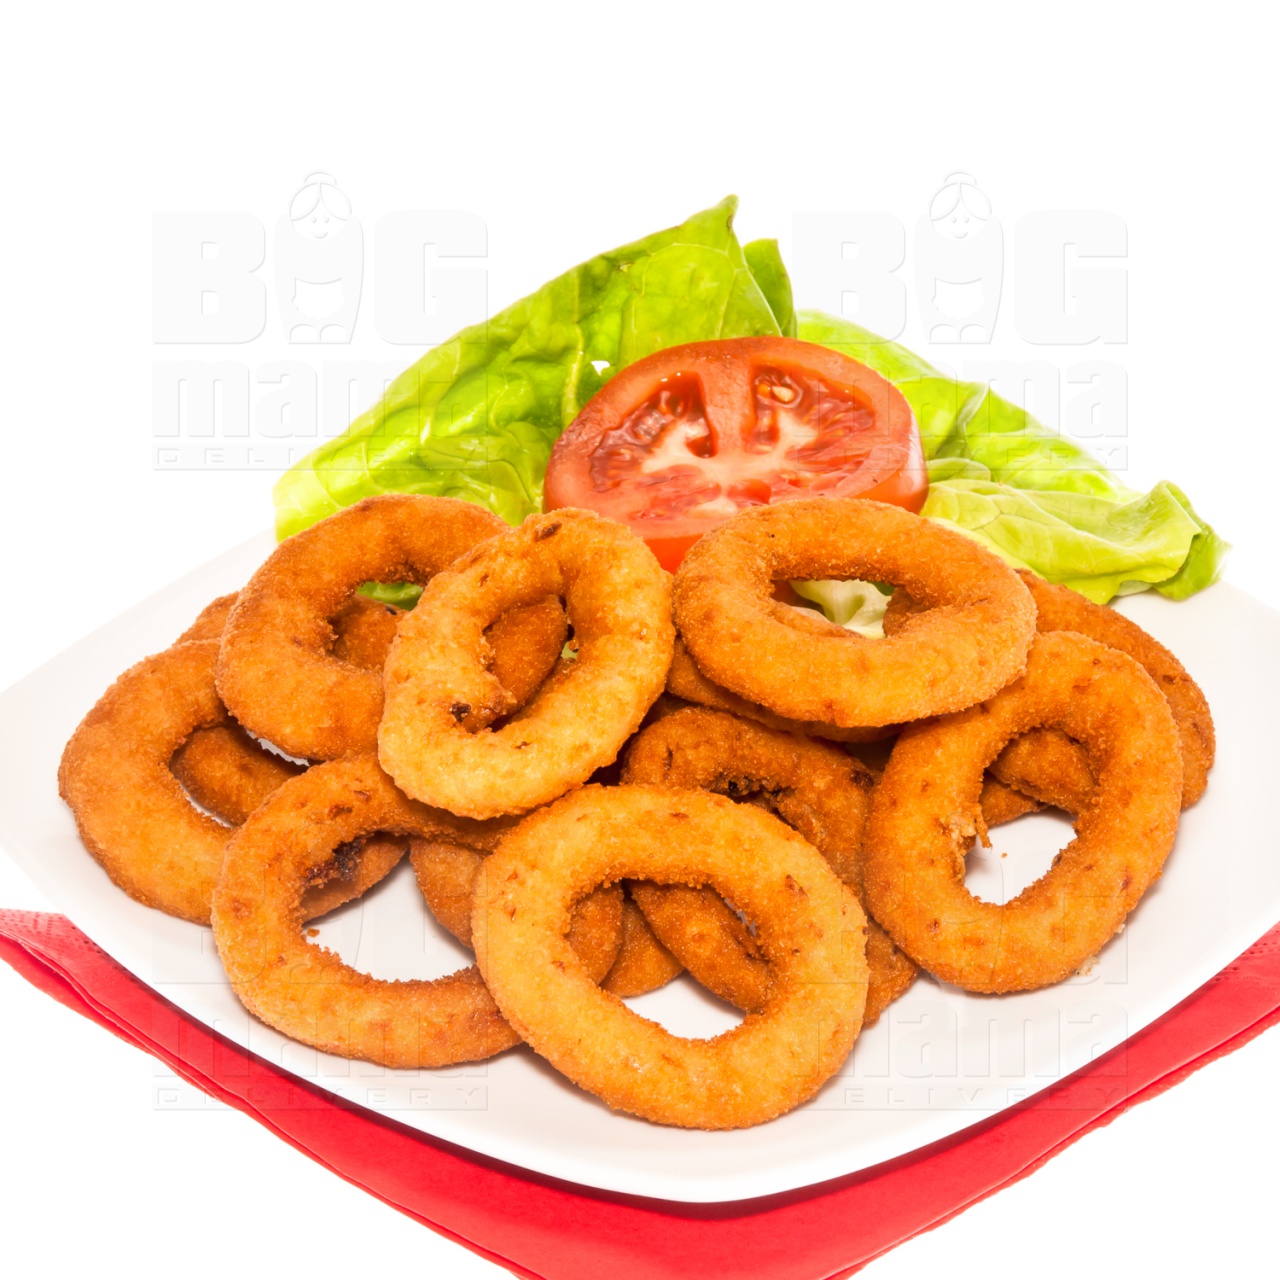 Product #182 image - Onion rings, half portion